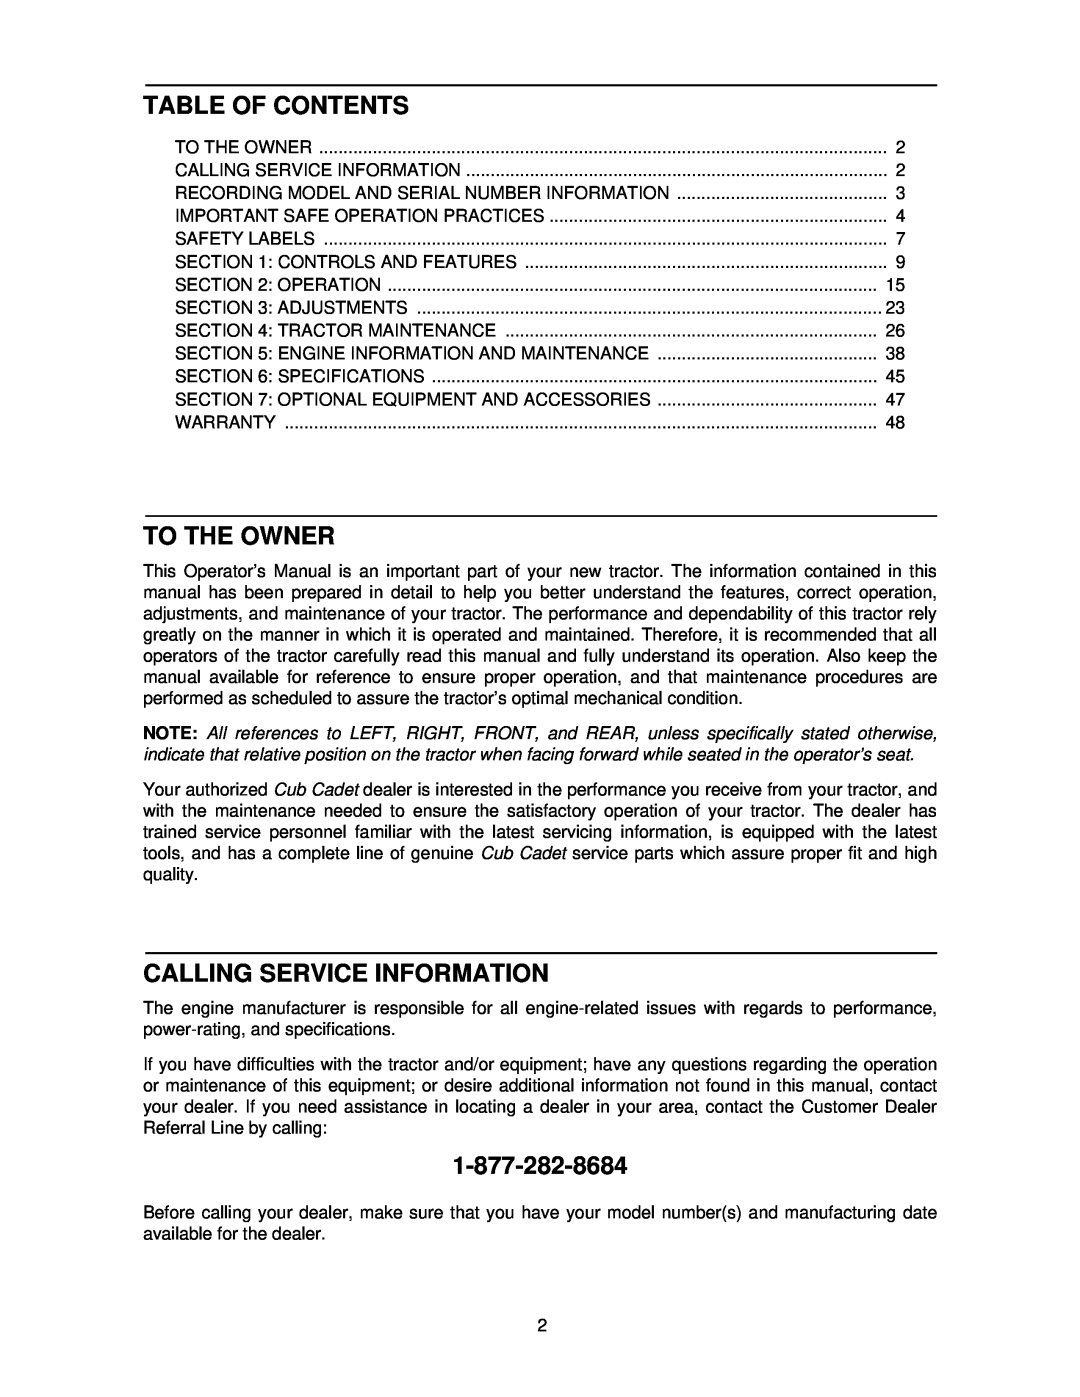 Cub Cadet 7252 manual Table Of Contents, To The Owner, Calling Service Information 